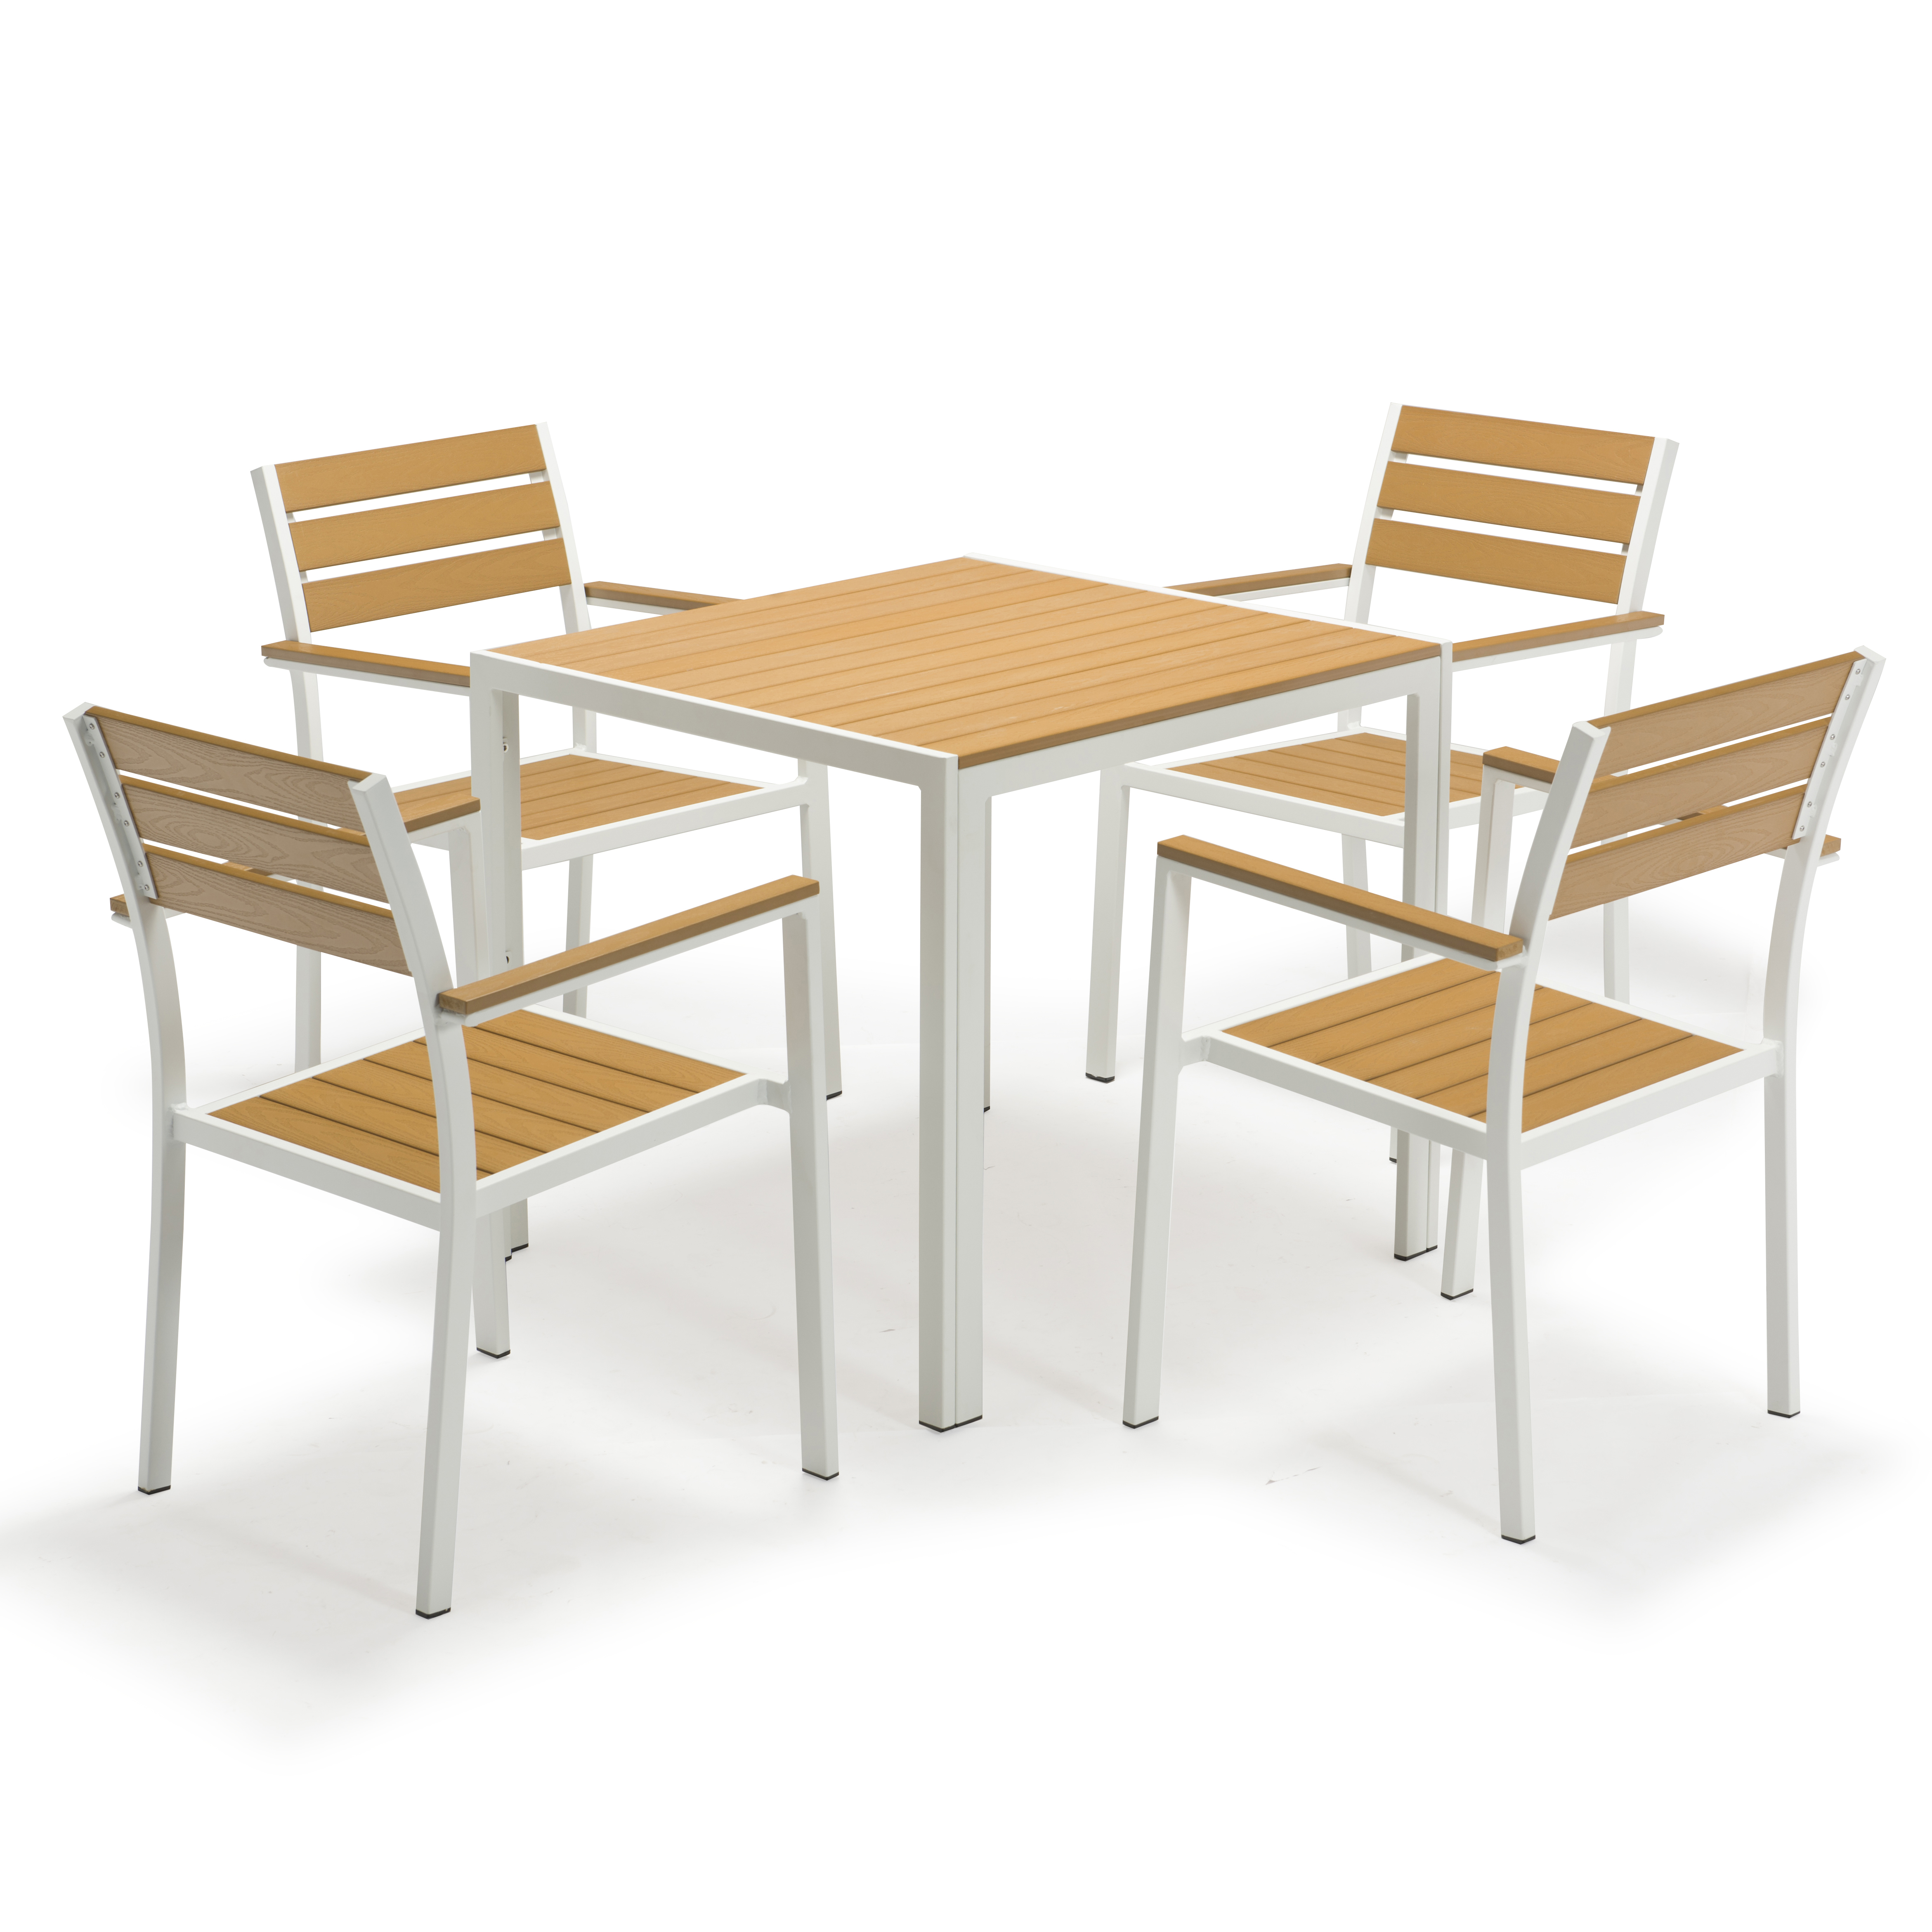 Courtyard Plastic Wood Terrace Outdoor Tables and Chairs